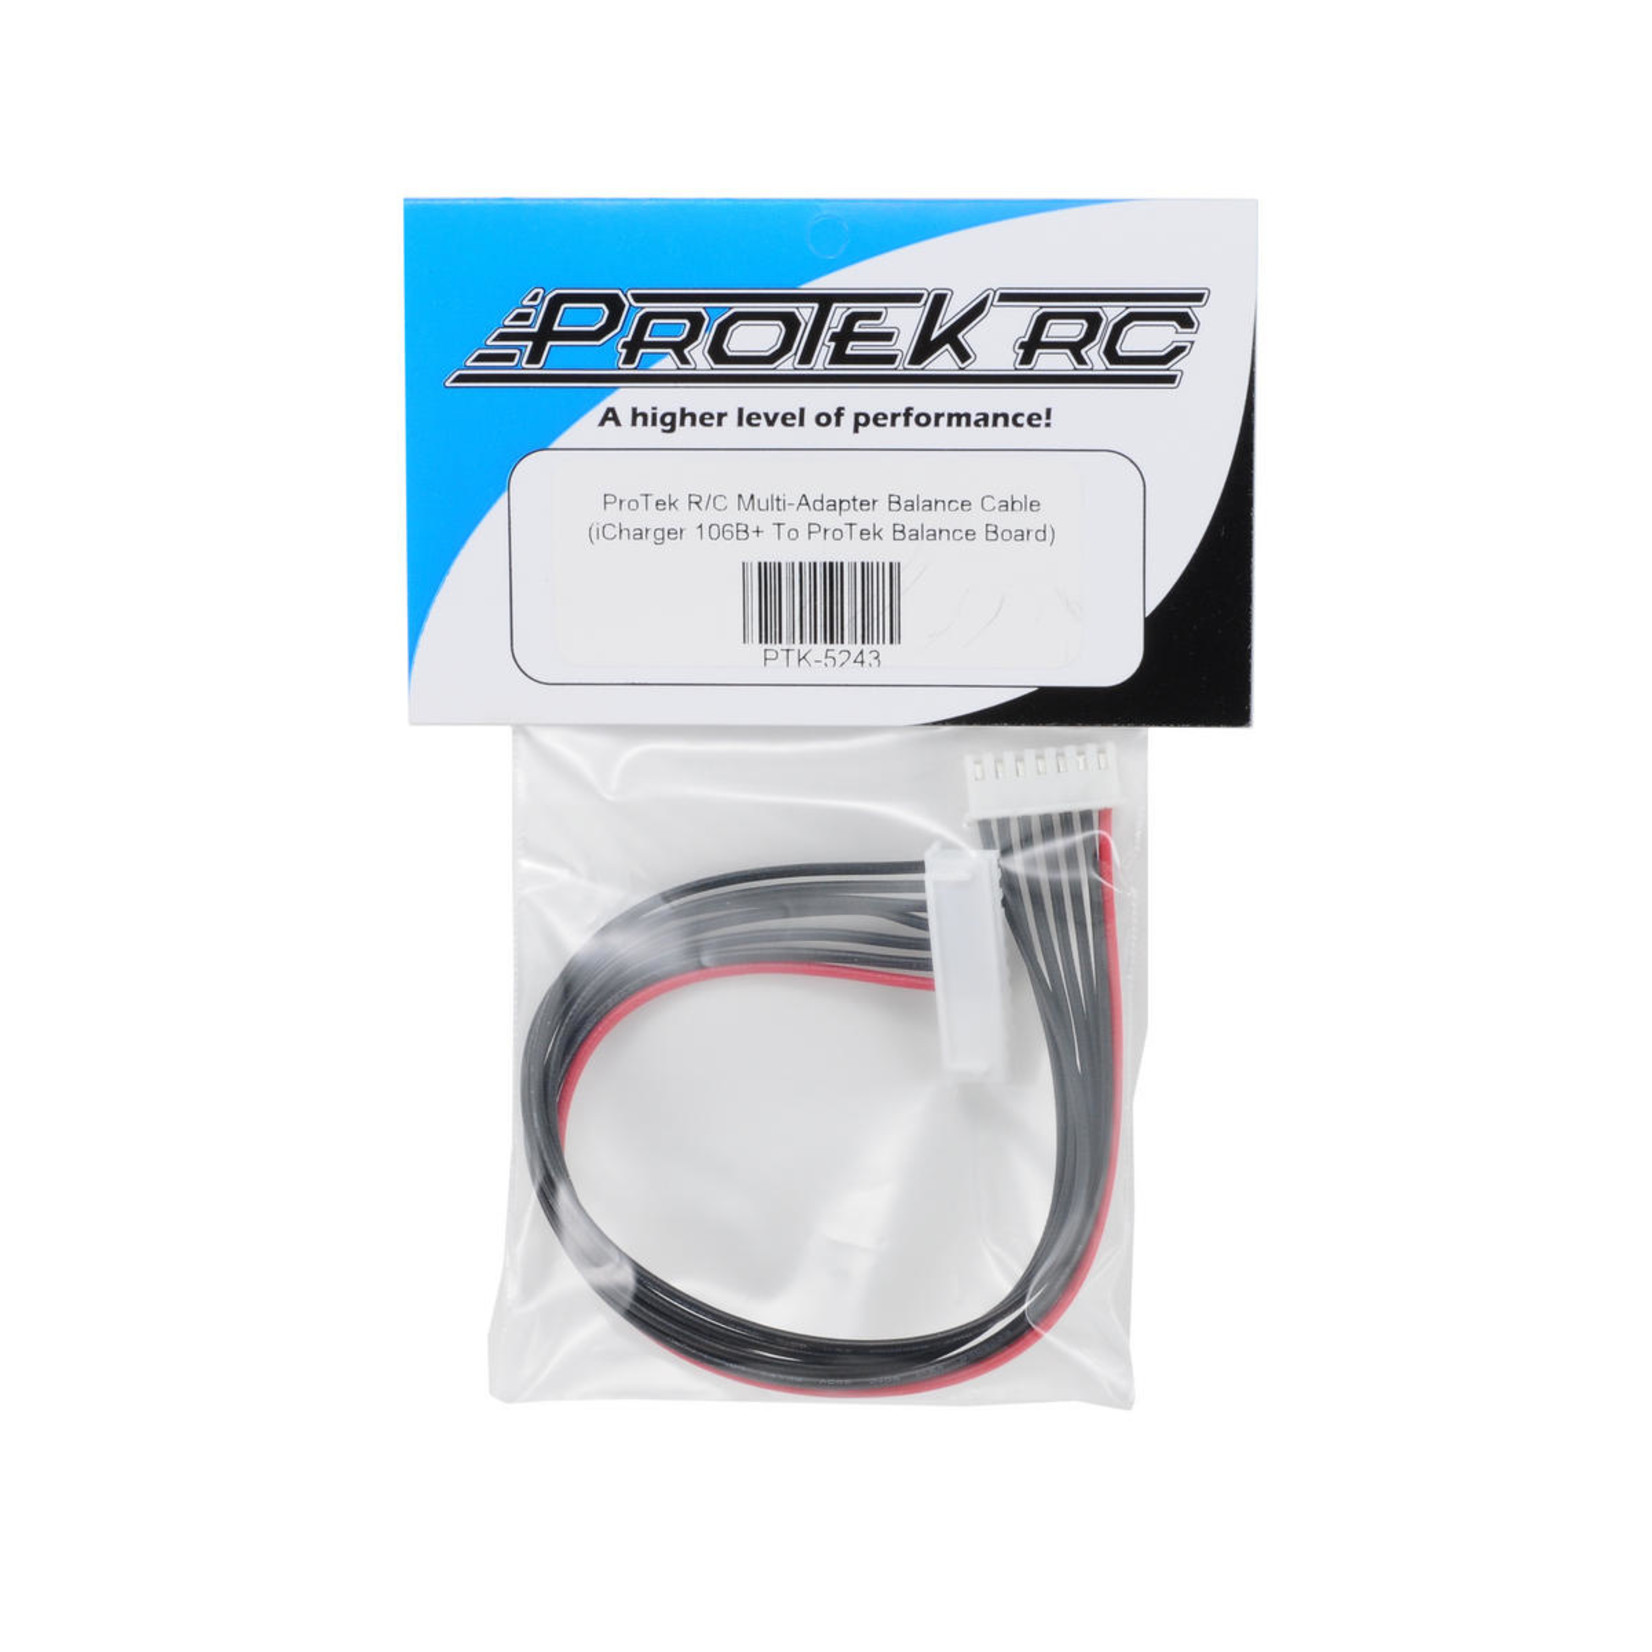 Protek R/C PTK-5243   RC 20cm Multi-Adapter Balance Cable (6S to 10S Balance Board)